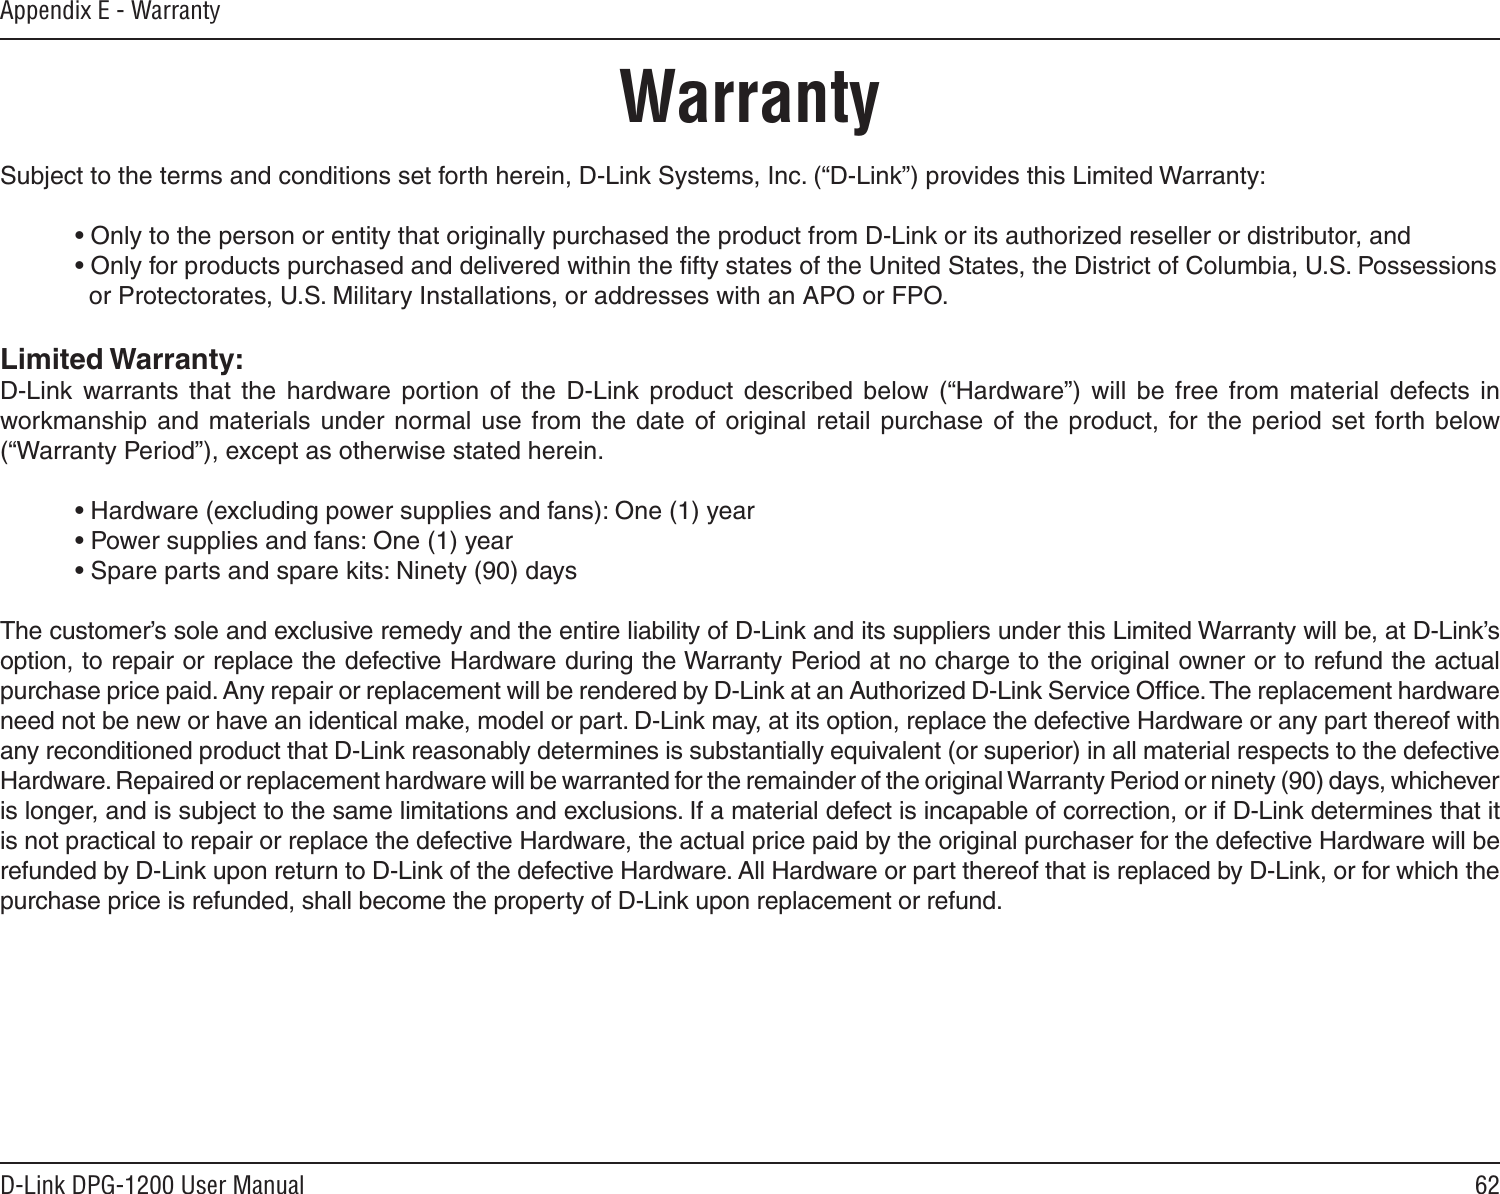 62D-Link DPG-1200 User ManualAppendix E - WarrantyWarrantySubject to the terms and conditions set forth herein, D-Link Systems, Inc. (“D-Link”) provides this Limited Warranty:  • Only to the person or entity that originally purchased the product from D-Link or its authorized reseller or distributor, and  • Only for products purchased and delivered within the ﬁfty states of the United States, the District of Columbia, U.S. Possessions      or Protectorates, U.S. Military Installations, or addresses with an APO or FPO.Limited Warranty:D-Link  warrants that  the  hardware  portion  of  the  D-Link  product  described  below  (“Hardware”)  will  be  free  from  material  defects  in workmanship  and  materials  under  normal  use  from  the  date  of  original  retail purchase  of the  product,  for  the period  set  forth below (“Warranty Period”), except as otherwise stated herein.  • Hardware (excluding power supplies and fans): One (1) year  • Power supplies and fans: One (1) year  • Spare parts and spare kits: Ninety (90) daysThe customer’s sole and exclusive remedy and the entire liability of D-Link and its suppliers under this Limited Warranty will be, at D-Link’s option, to repair or replace the defective Hardware during the Warranty Period at no charge to the original owner or to refund the actual purchase price paid. Any repair or replacement will be rendered by D-Link at an Authorized D-Link Service Ofﬁce. The replacement hardware need not be new or have an identical make, model or part. D-Link may, at its option, replace the defective Hardware or any part thereof with any reconditioned product that D-Link reasonably determines is substantially equivalent (or superior) in all material respects to the defective Hardware. Repaired or replacement hardware will be warranted for the remainder of the original Warranty Period or ninety (90) days, whichever is longer, and is subject to the same limitations and exclusions. If a material defect is incapable of correction, or if D-Link determines that it is not practical to repair or replace the defective Hardware, the actual price paid by the original purchaser for the defective Hardware will be refunded by D-Link upon return to D-Link of the defective Hardware. All Hardware or part thereof that is replaced by D-Link, or for which the purchase price is refunded, shall become the property of D-Link upon replacement or refund.